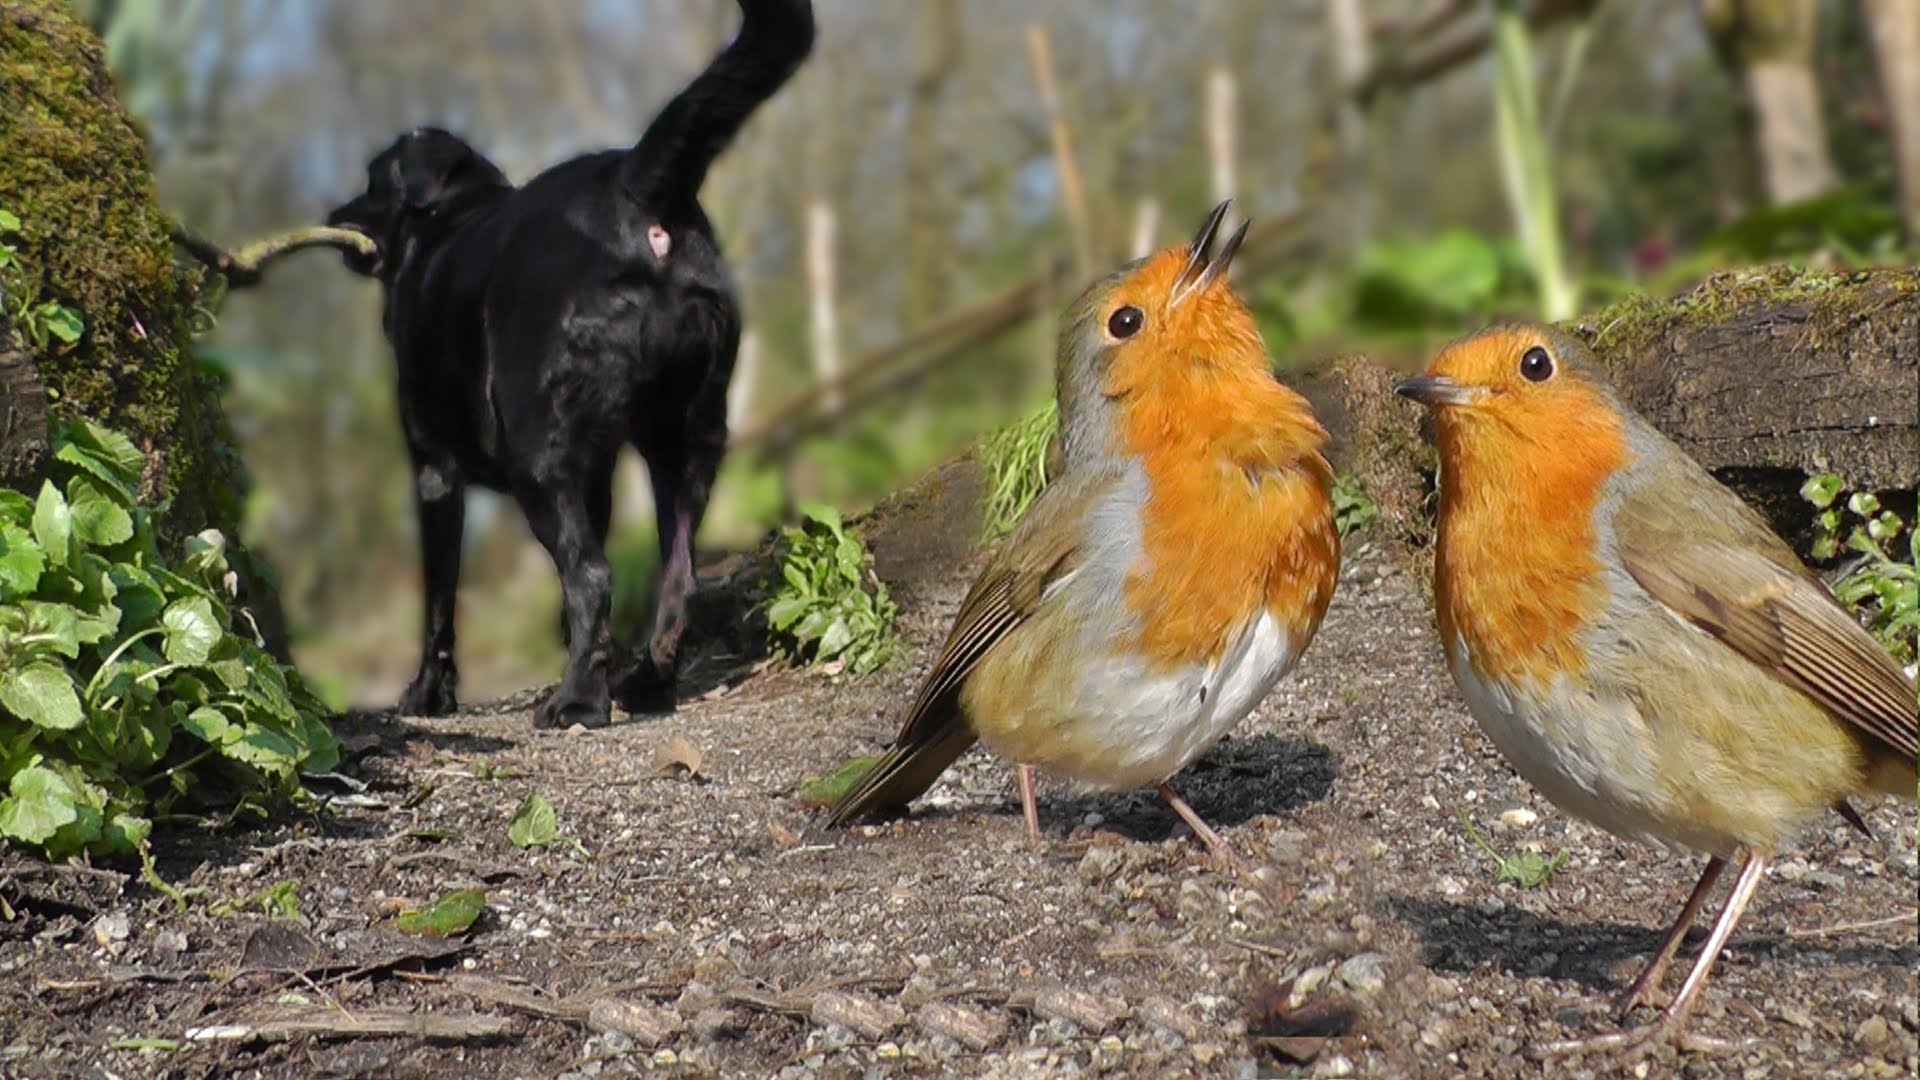 Videos for Dogs to Watch - Birds Chirping on The Ground - YouTube